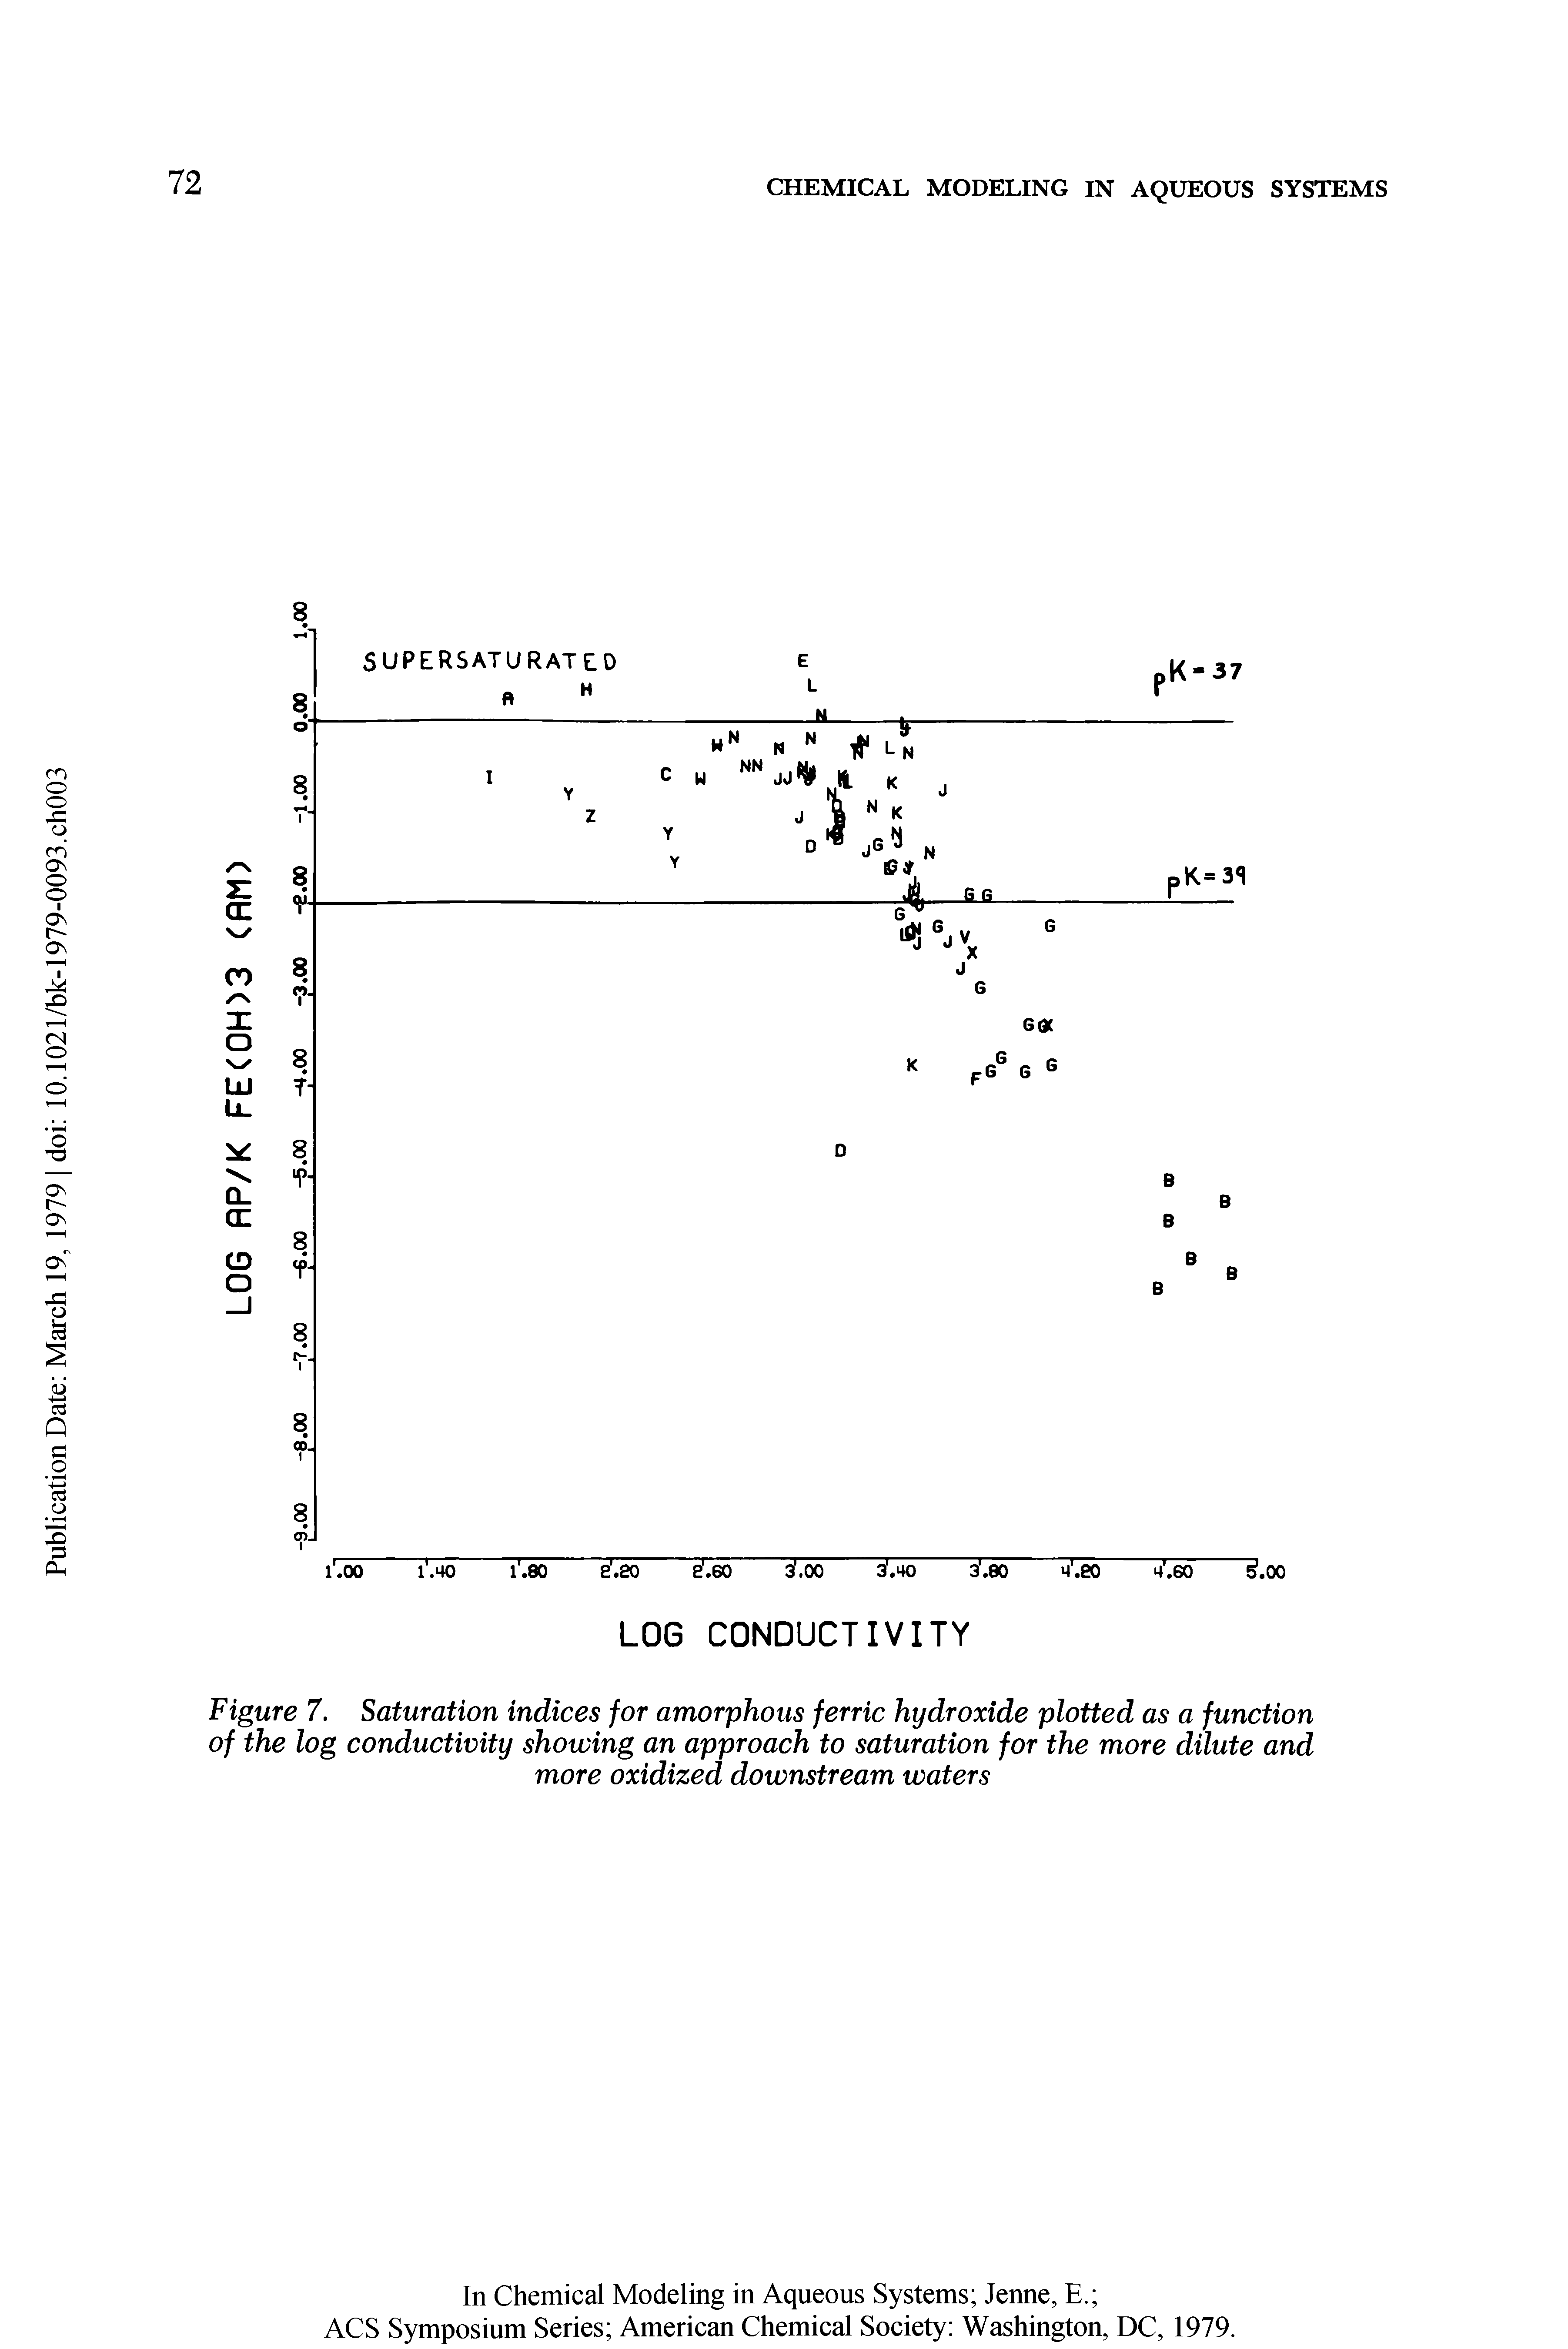 Figure 7. Saturation indices for amorphous ferric hydroxide plotted as a function of the log conductivity showing an approach to saturation for the more dilute and more oxidized downstream waters...